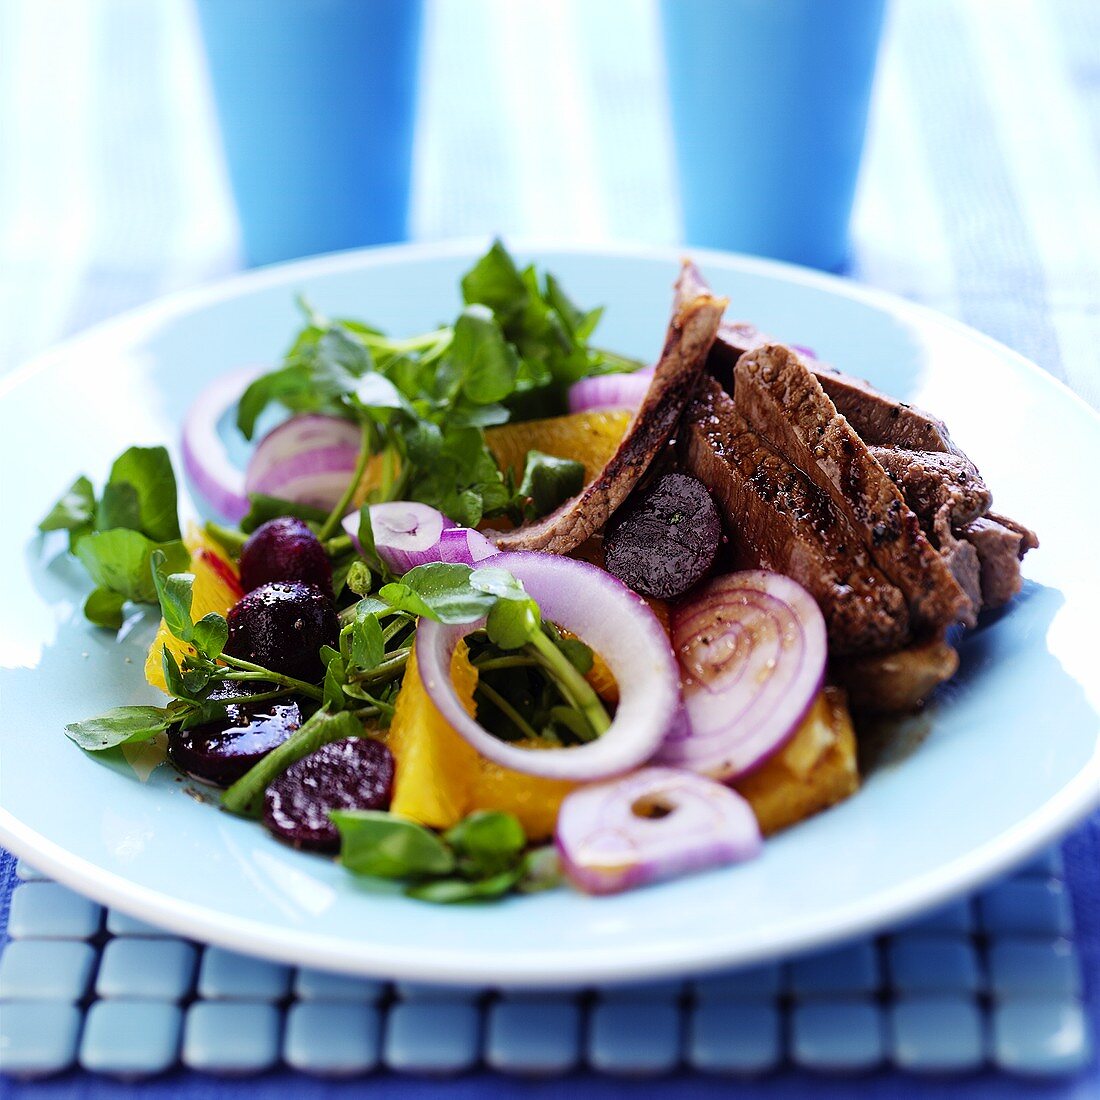 Beef salad with beetroot and fruit